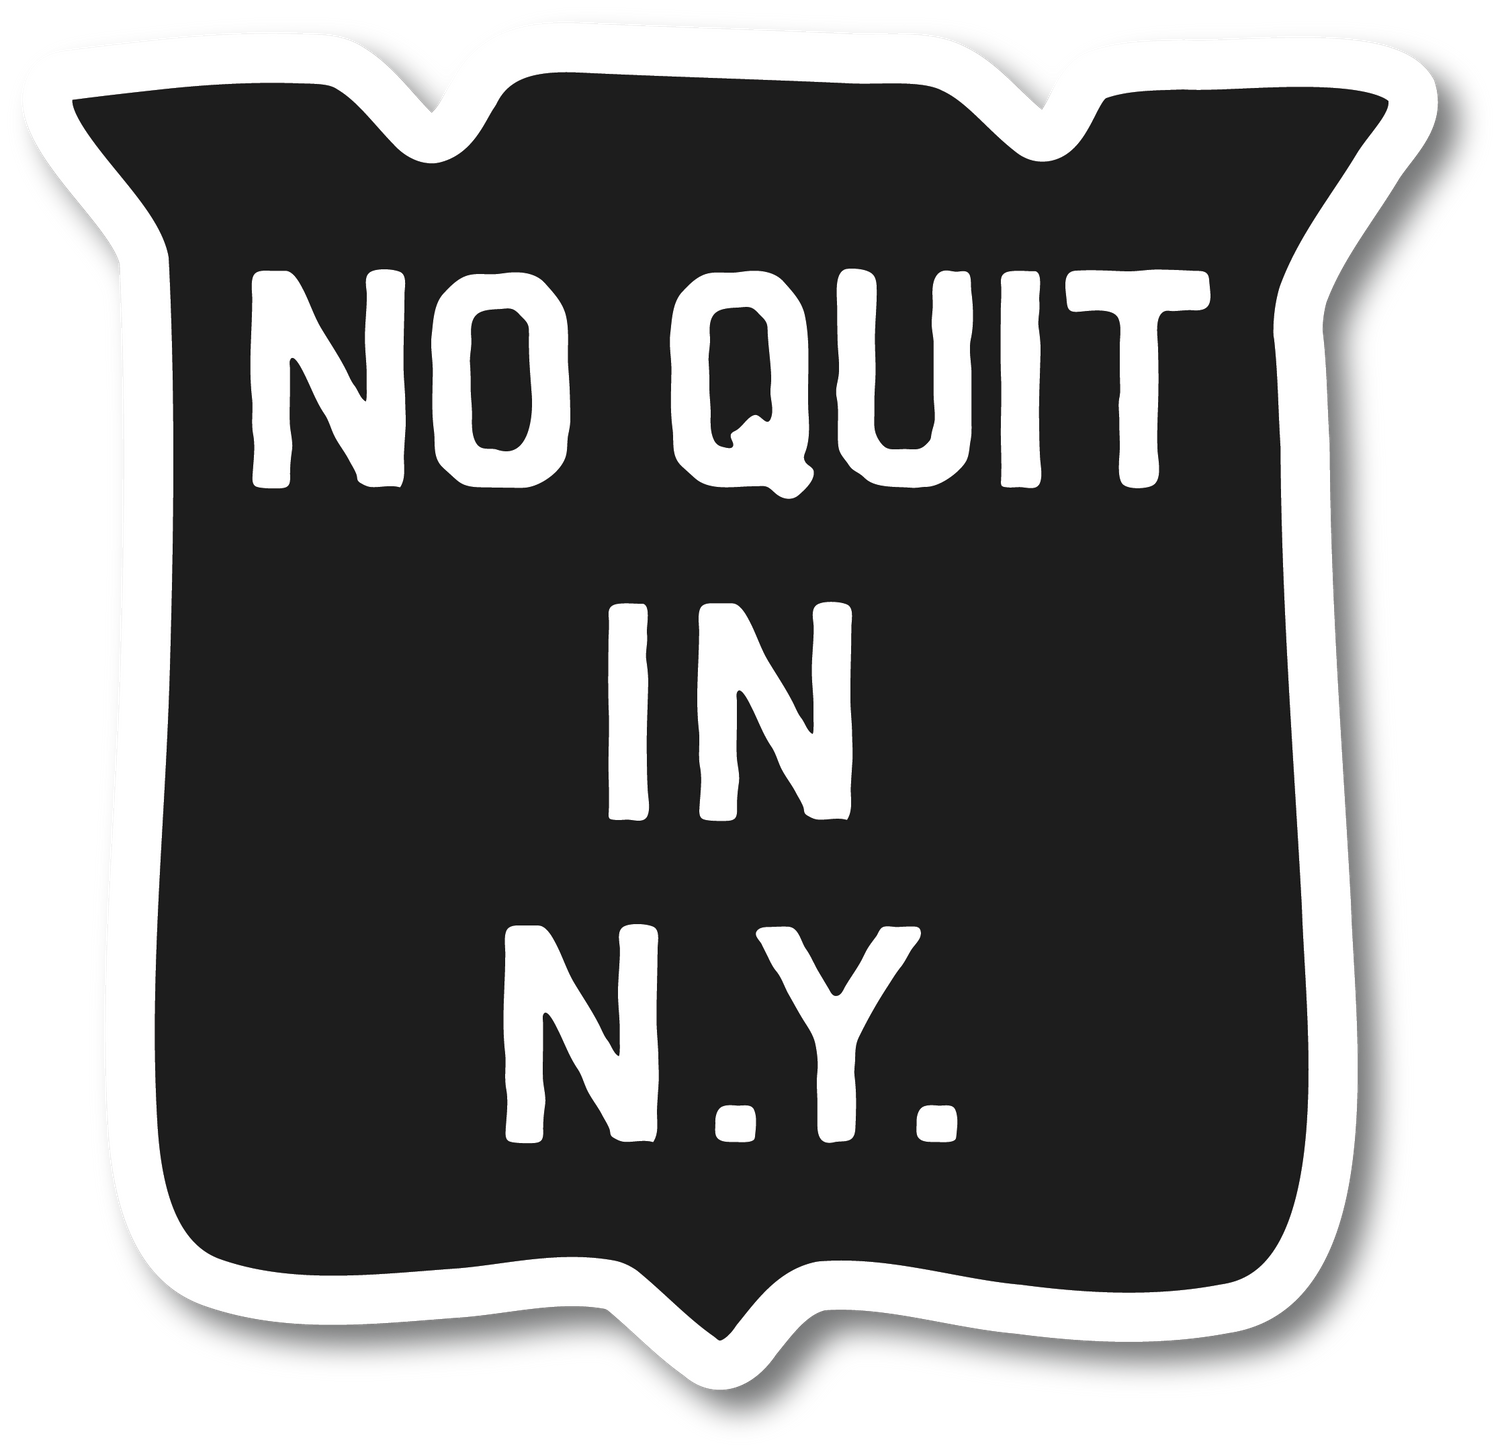 No Quit In NY Decal